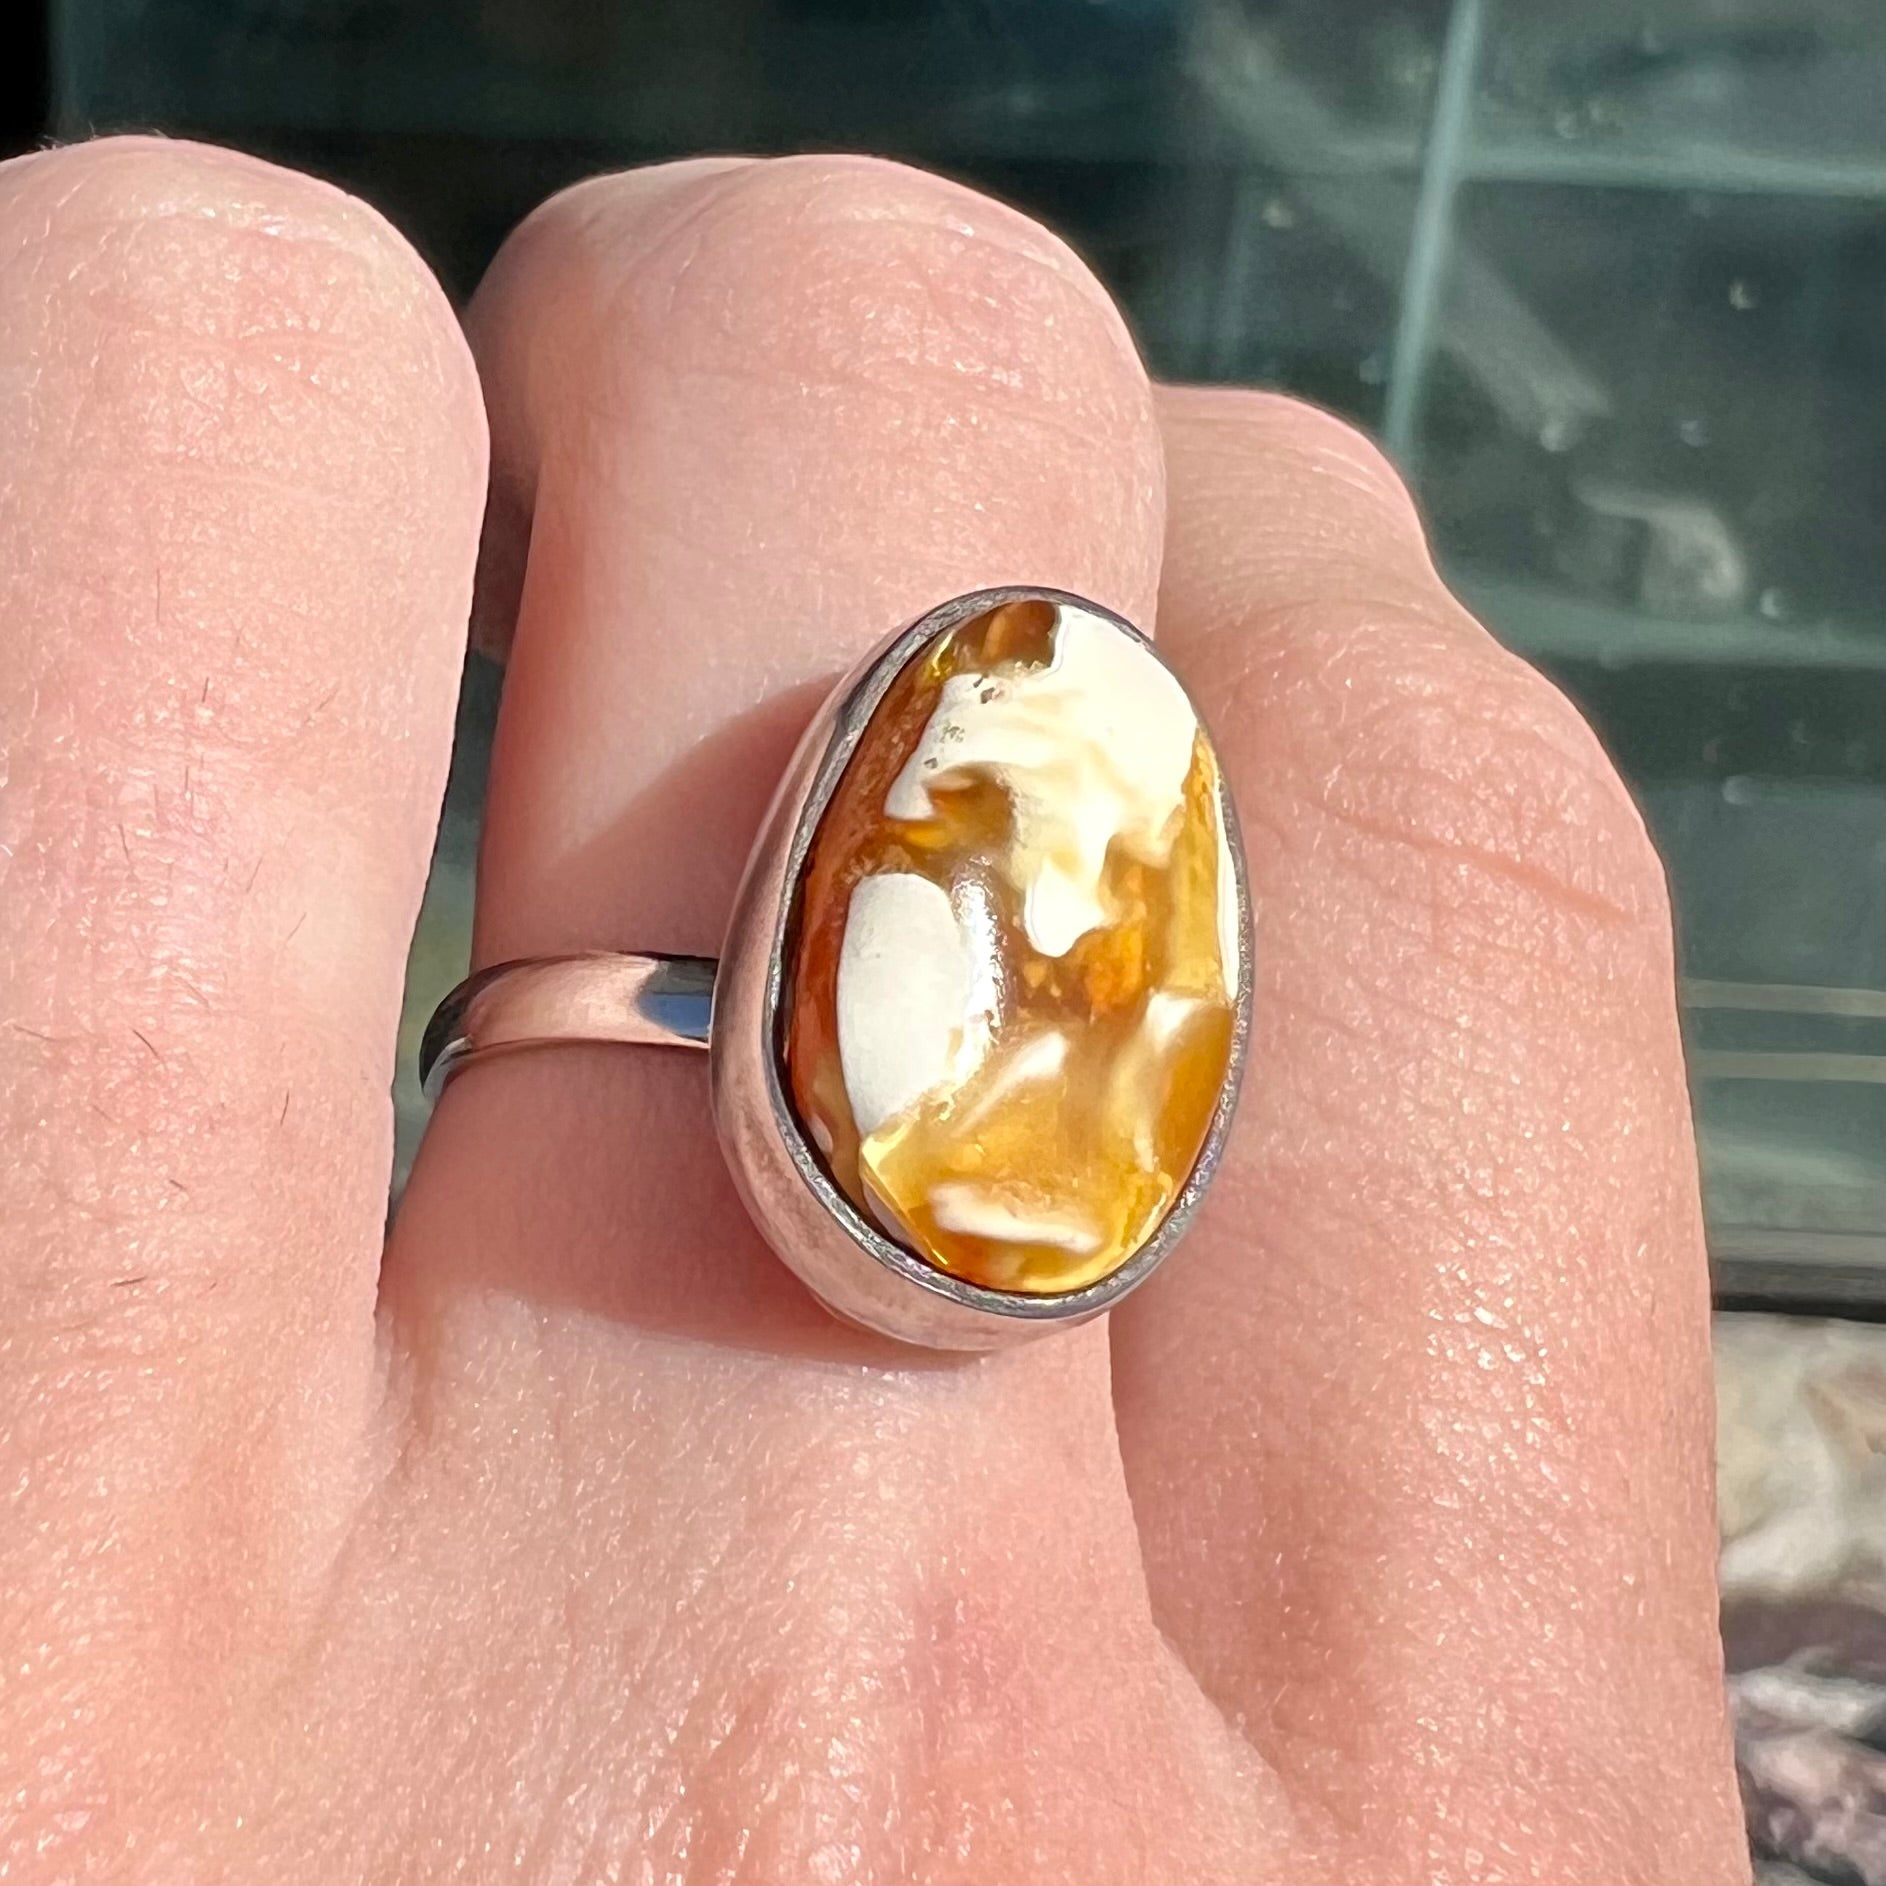 Amazon.com: Natural Baltic Amber Square Gemstone Solid 925 Sterling Silver  Signet Ring For Men/Boys, Unique Handmade Fathers Day Gifts Ring : Handmade  Products